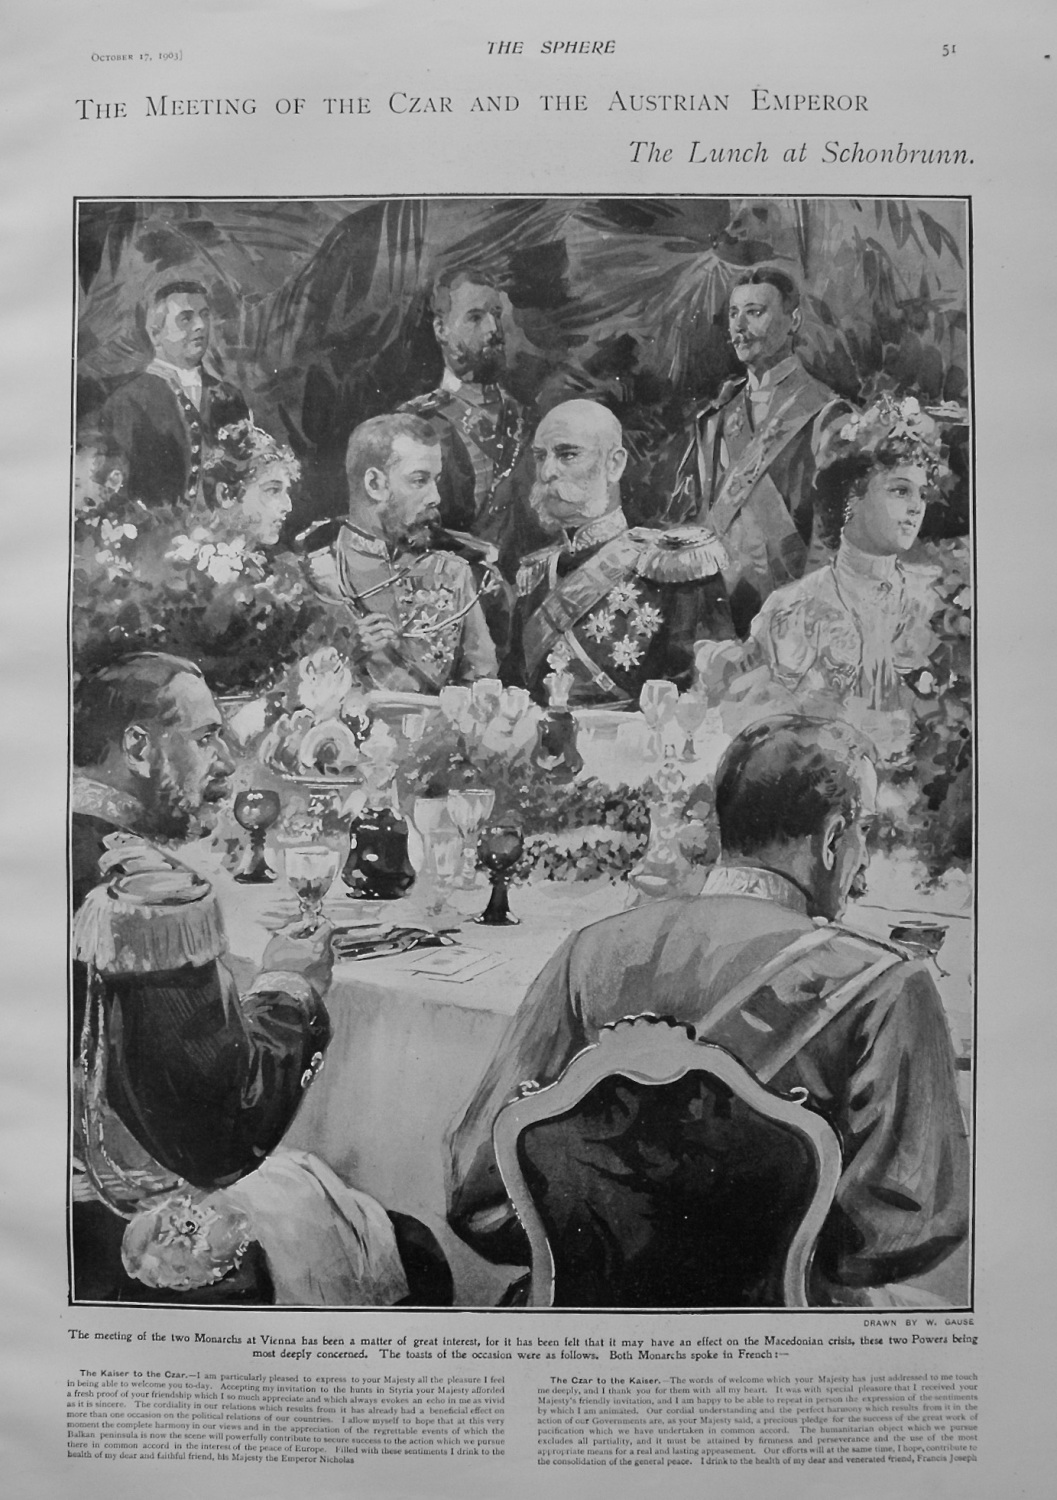 The Meeting of the Czar and the Austrian Emperor : The Lunch at Schonbrunn.